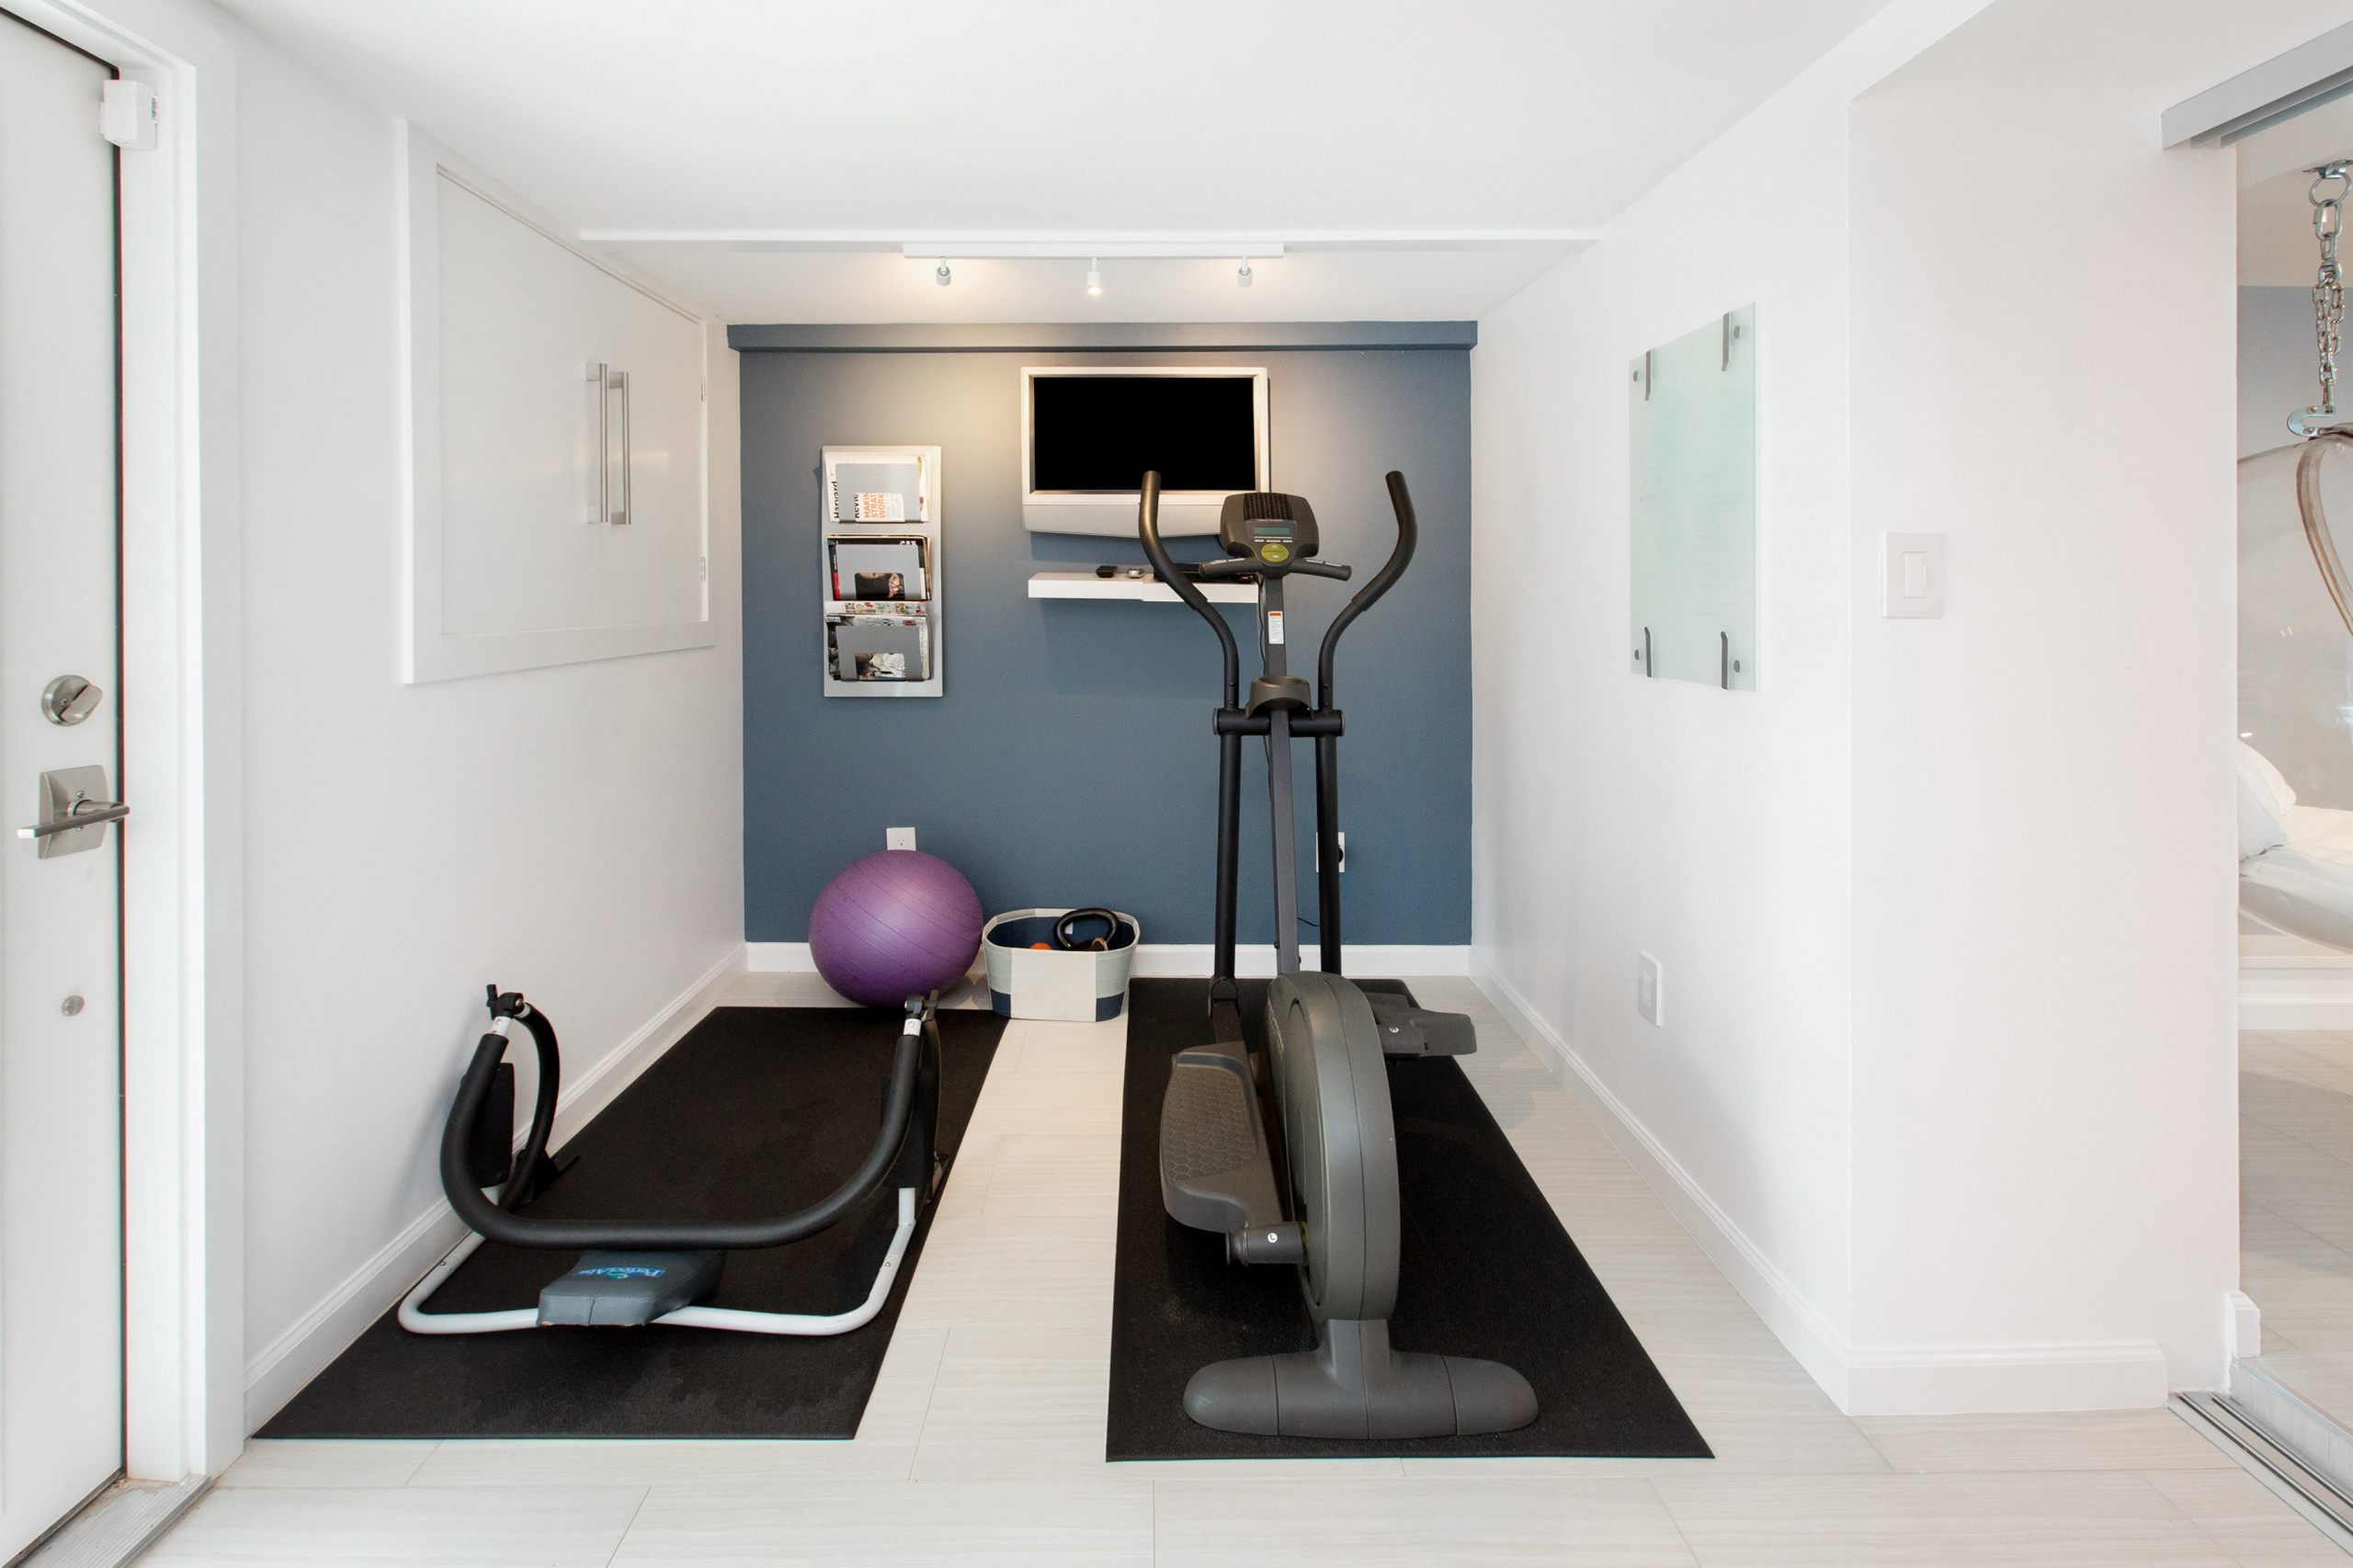 https://st.hzcdn.com/simgs/pictures/home-gyms/modern-basement-remodel-remodella-healthy-img~66f143c606394824_14-1984-1-dee1d4a.jpg